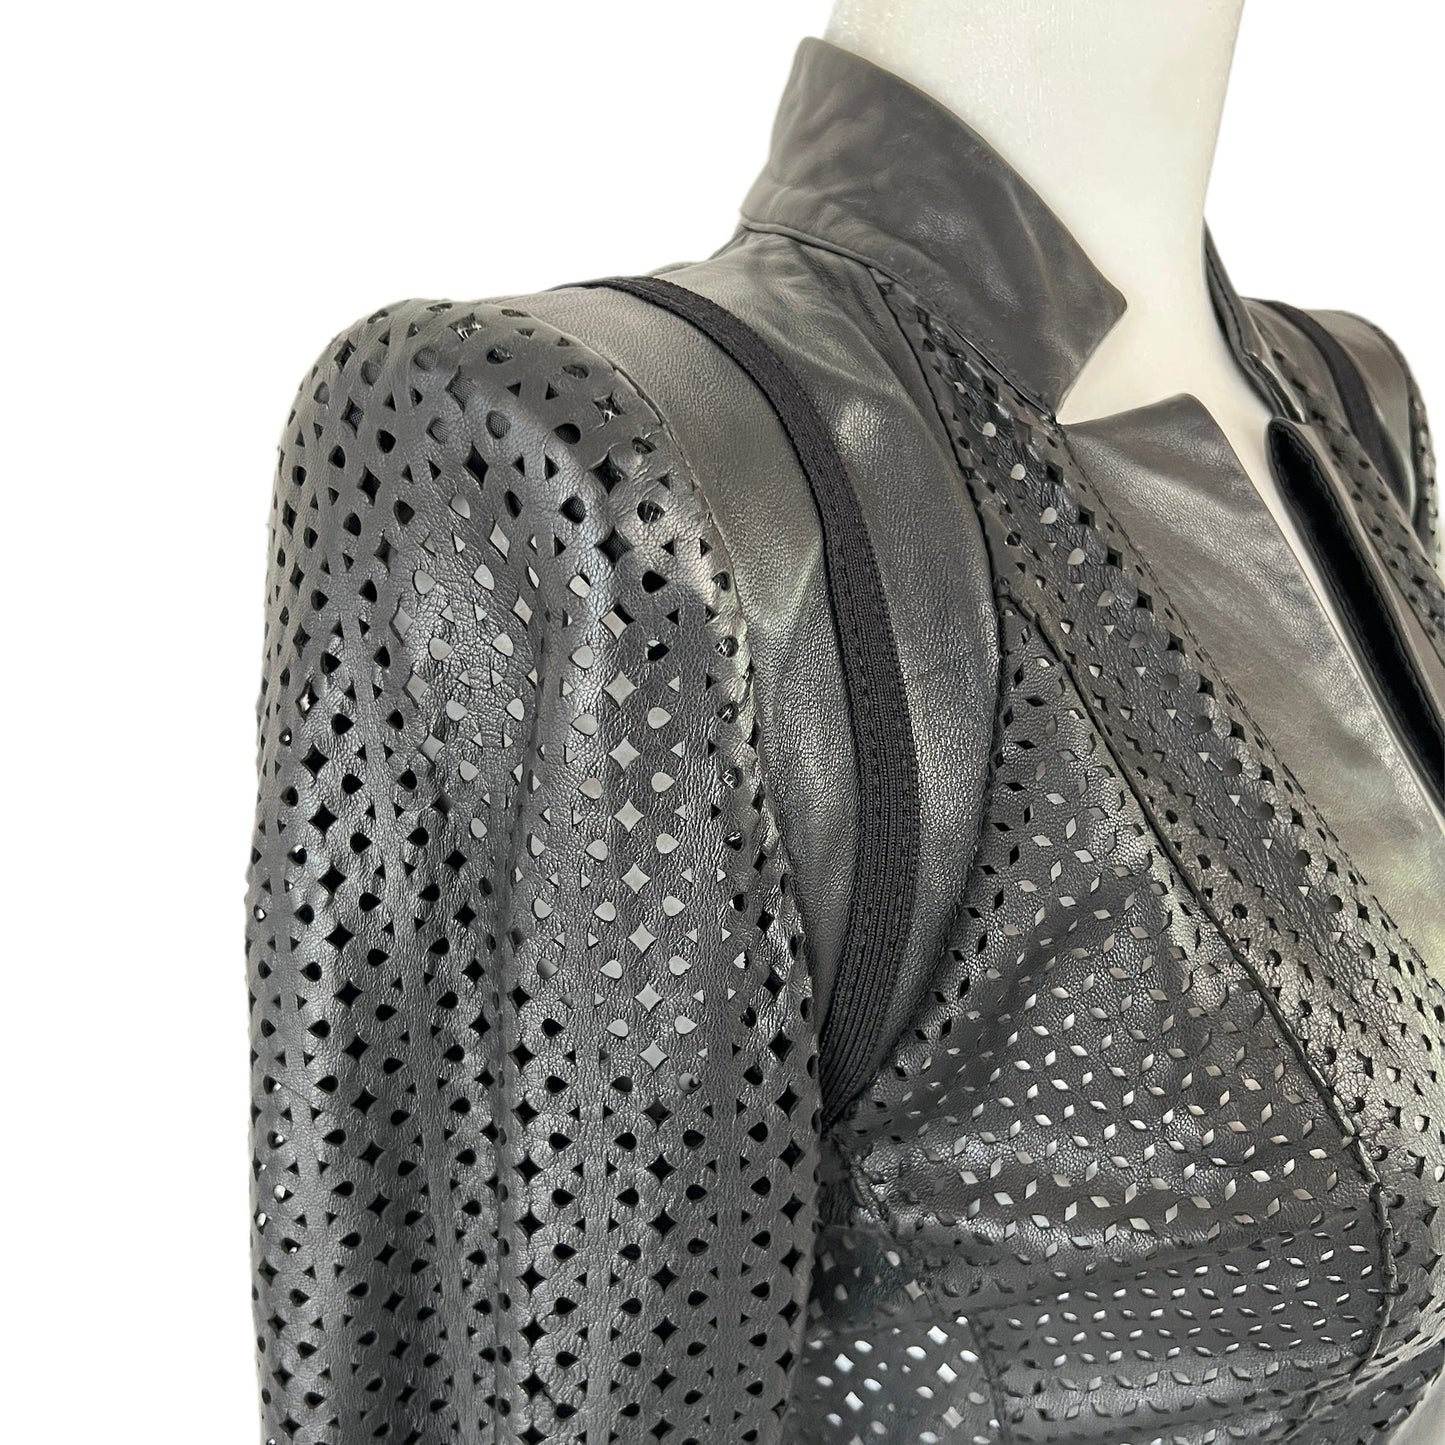 Leather Perforated Jacket - XS